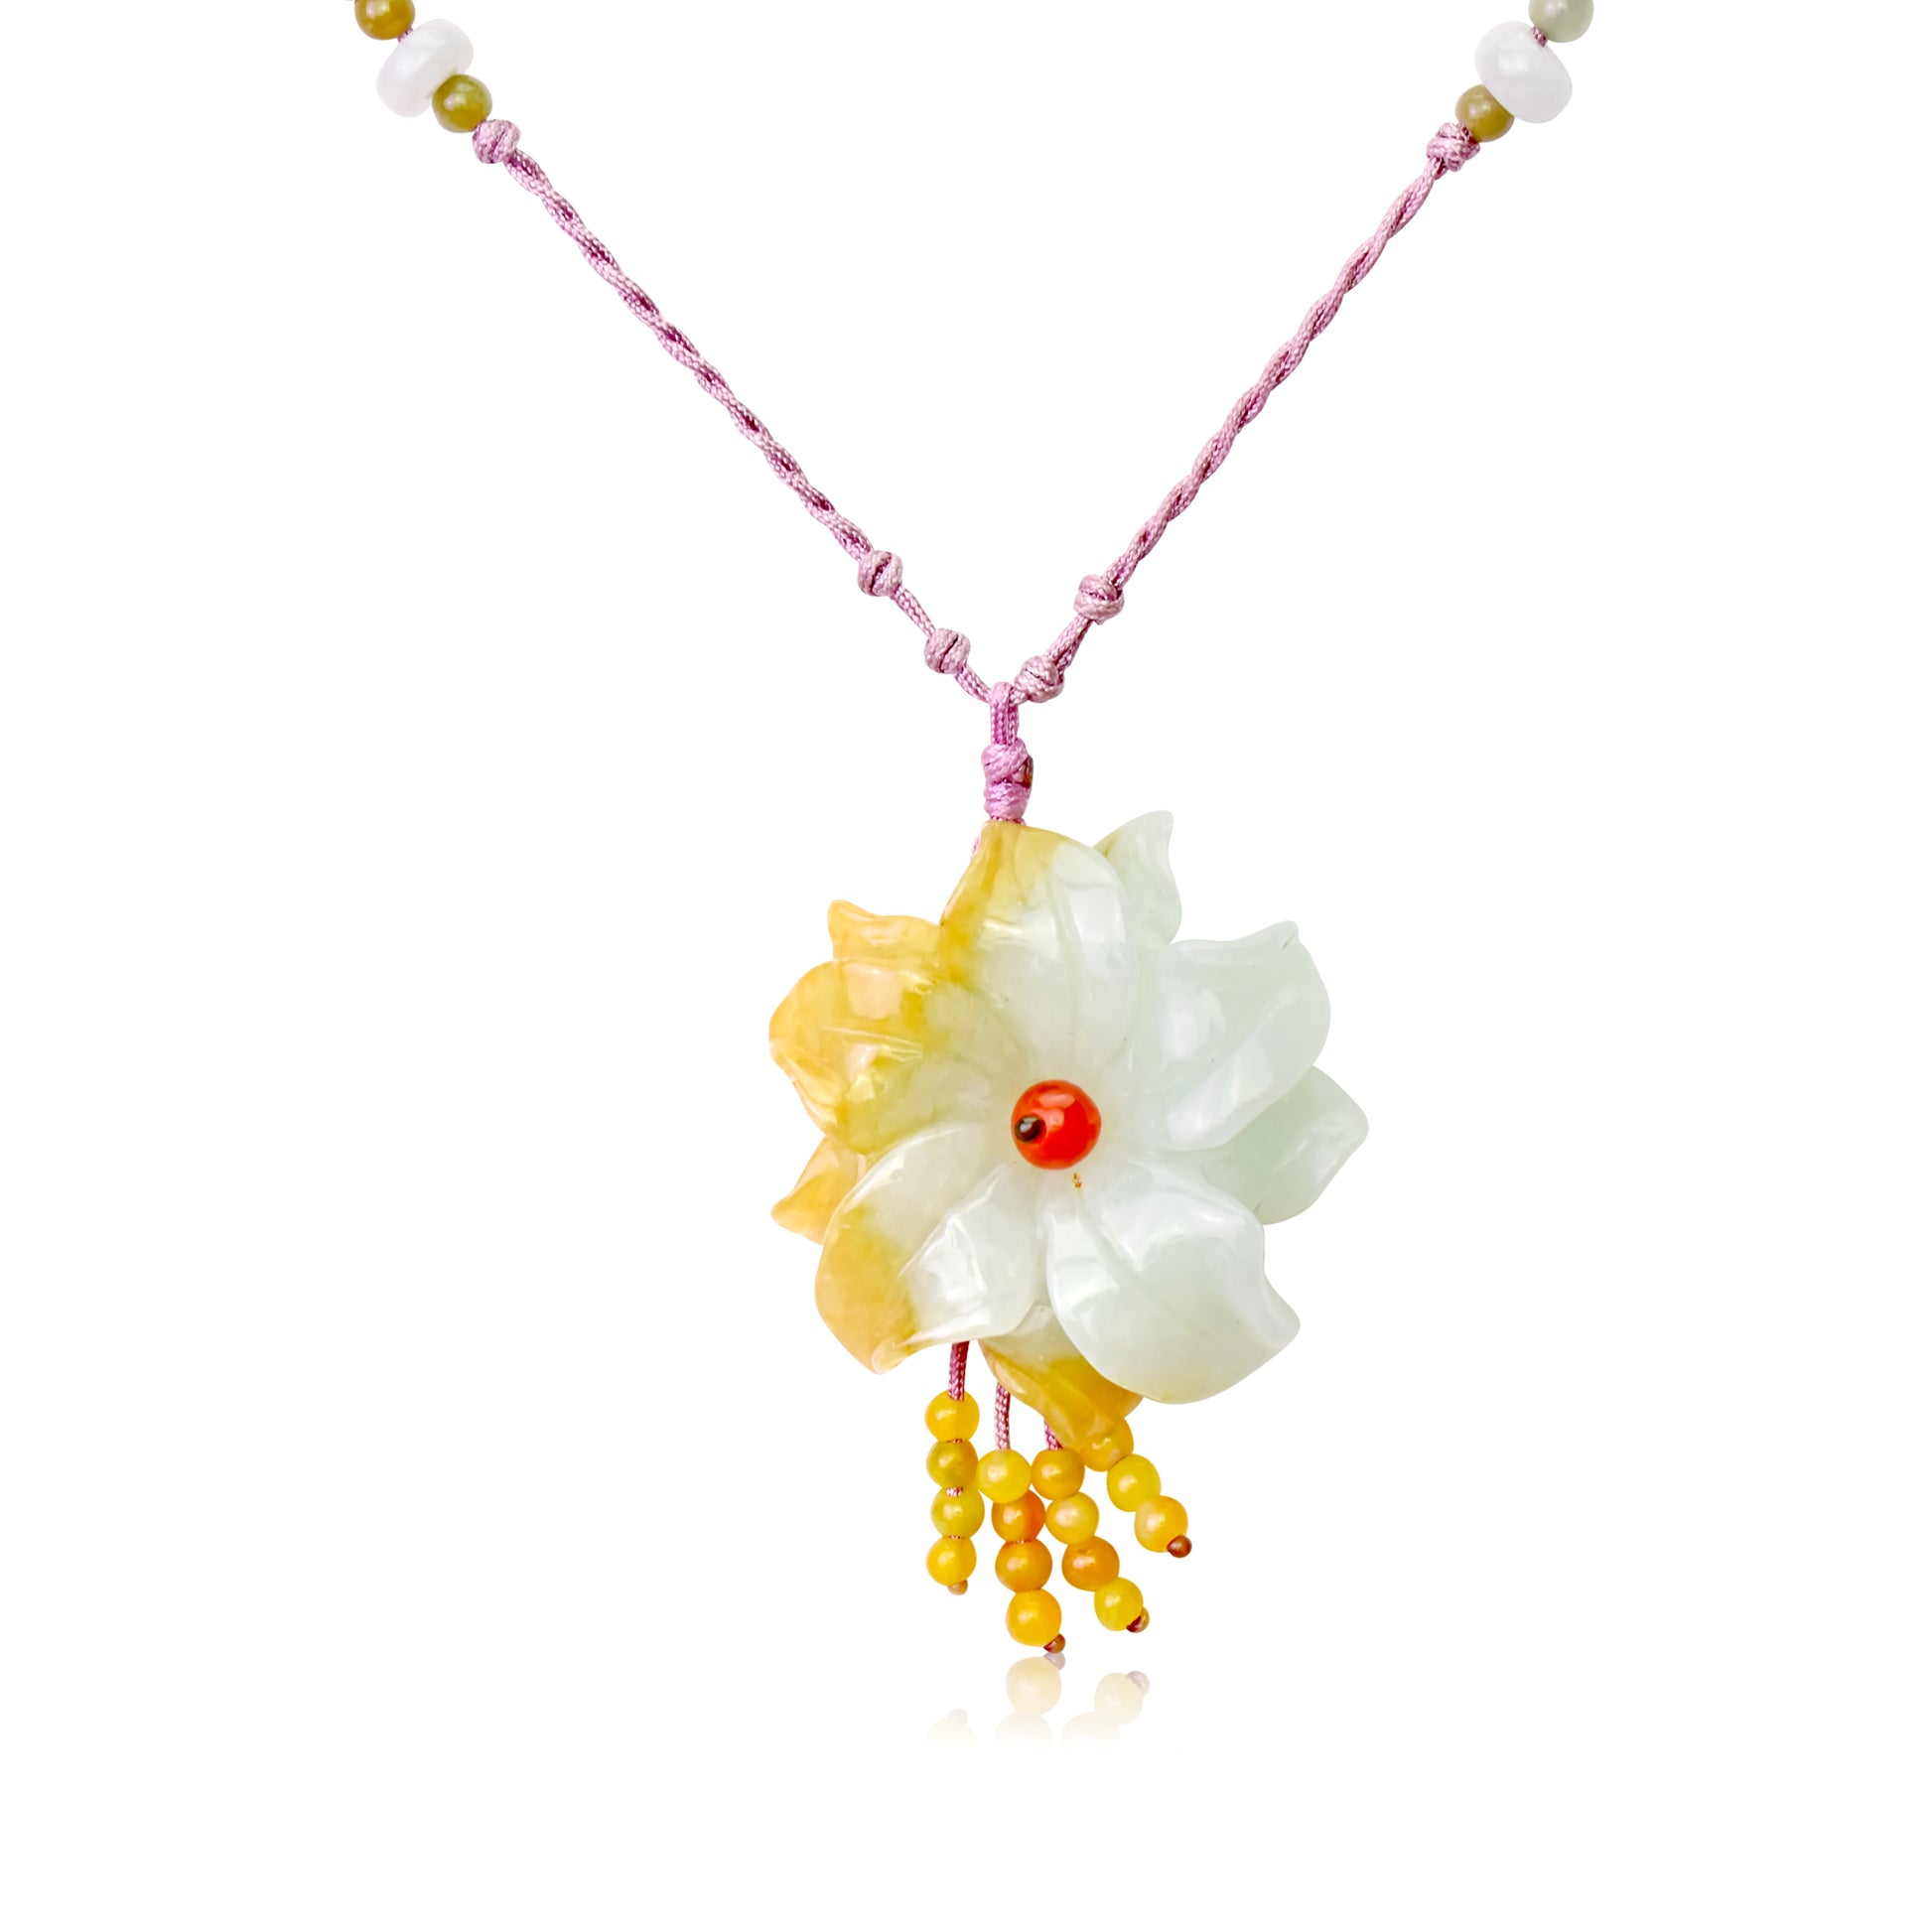 Get Lost in the Beauty of Anemone Flower Necklace